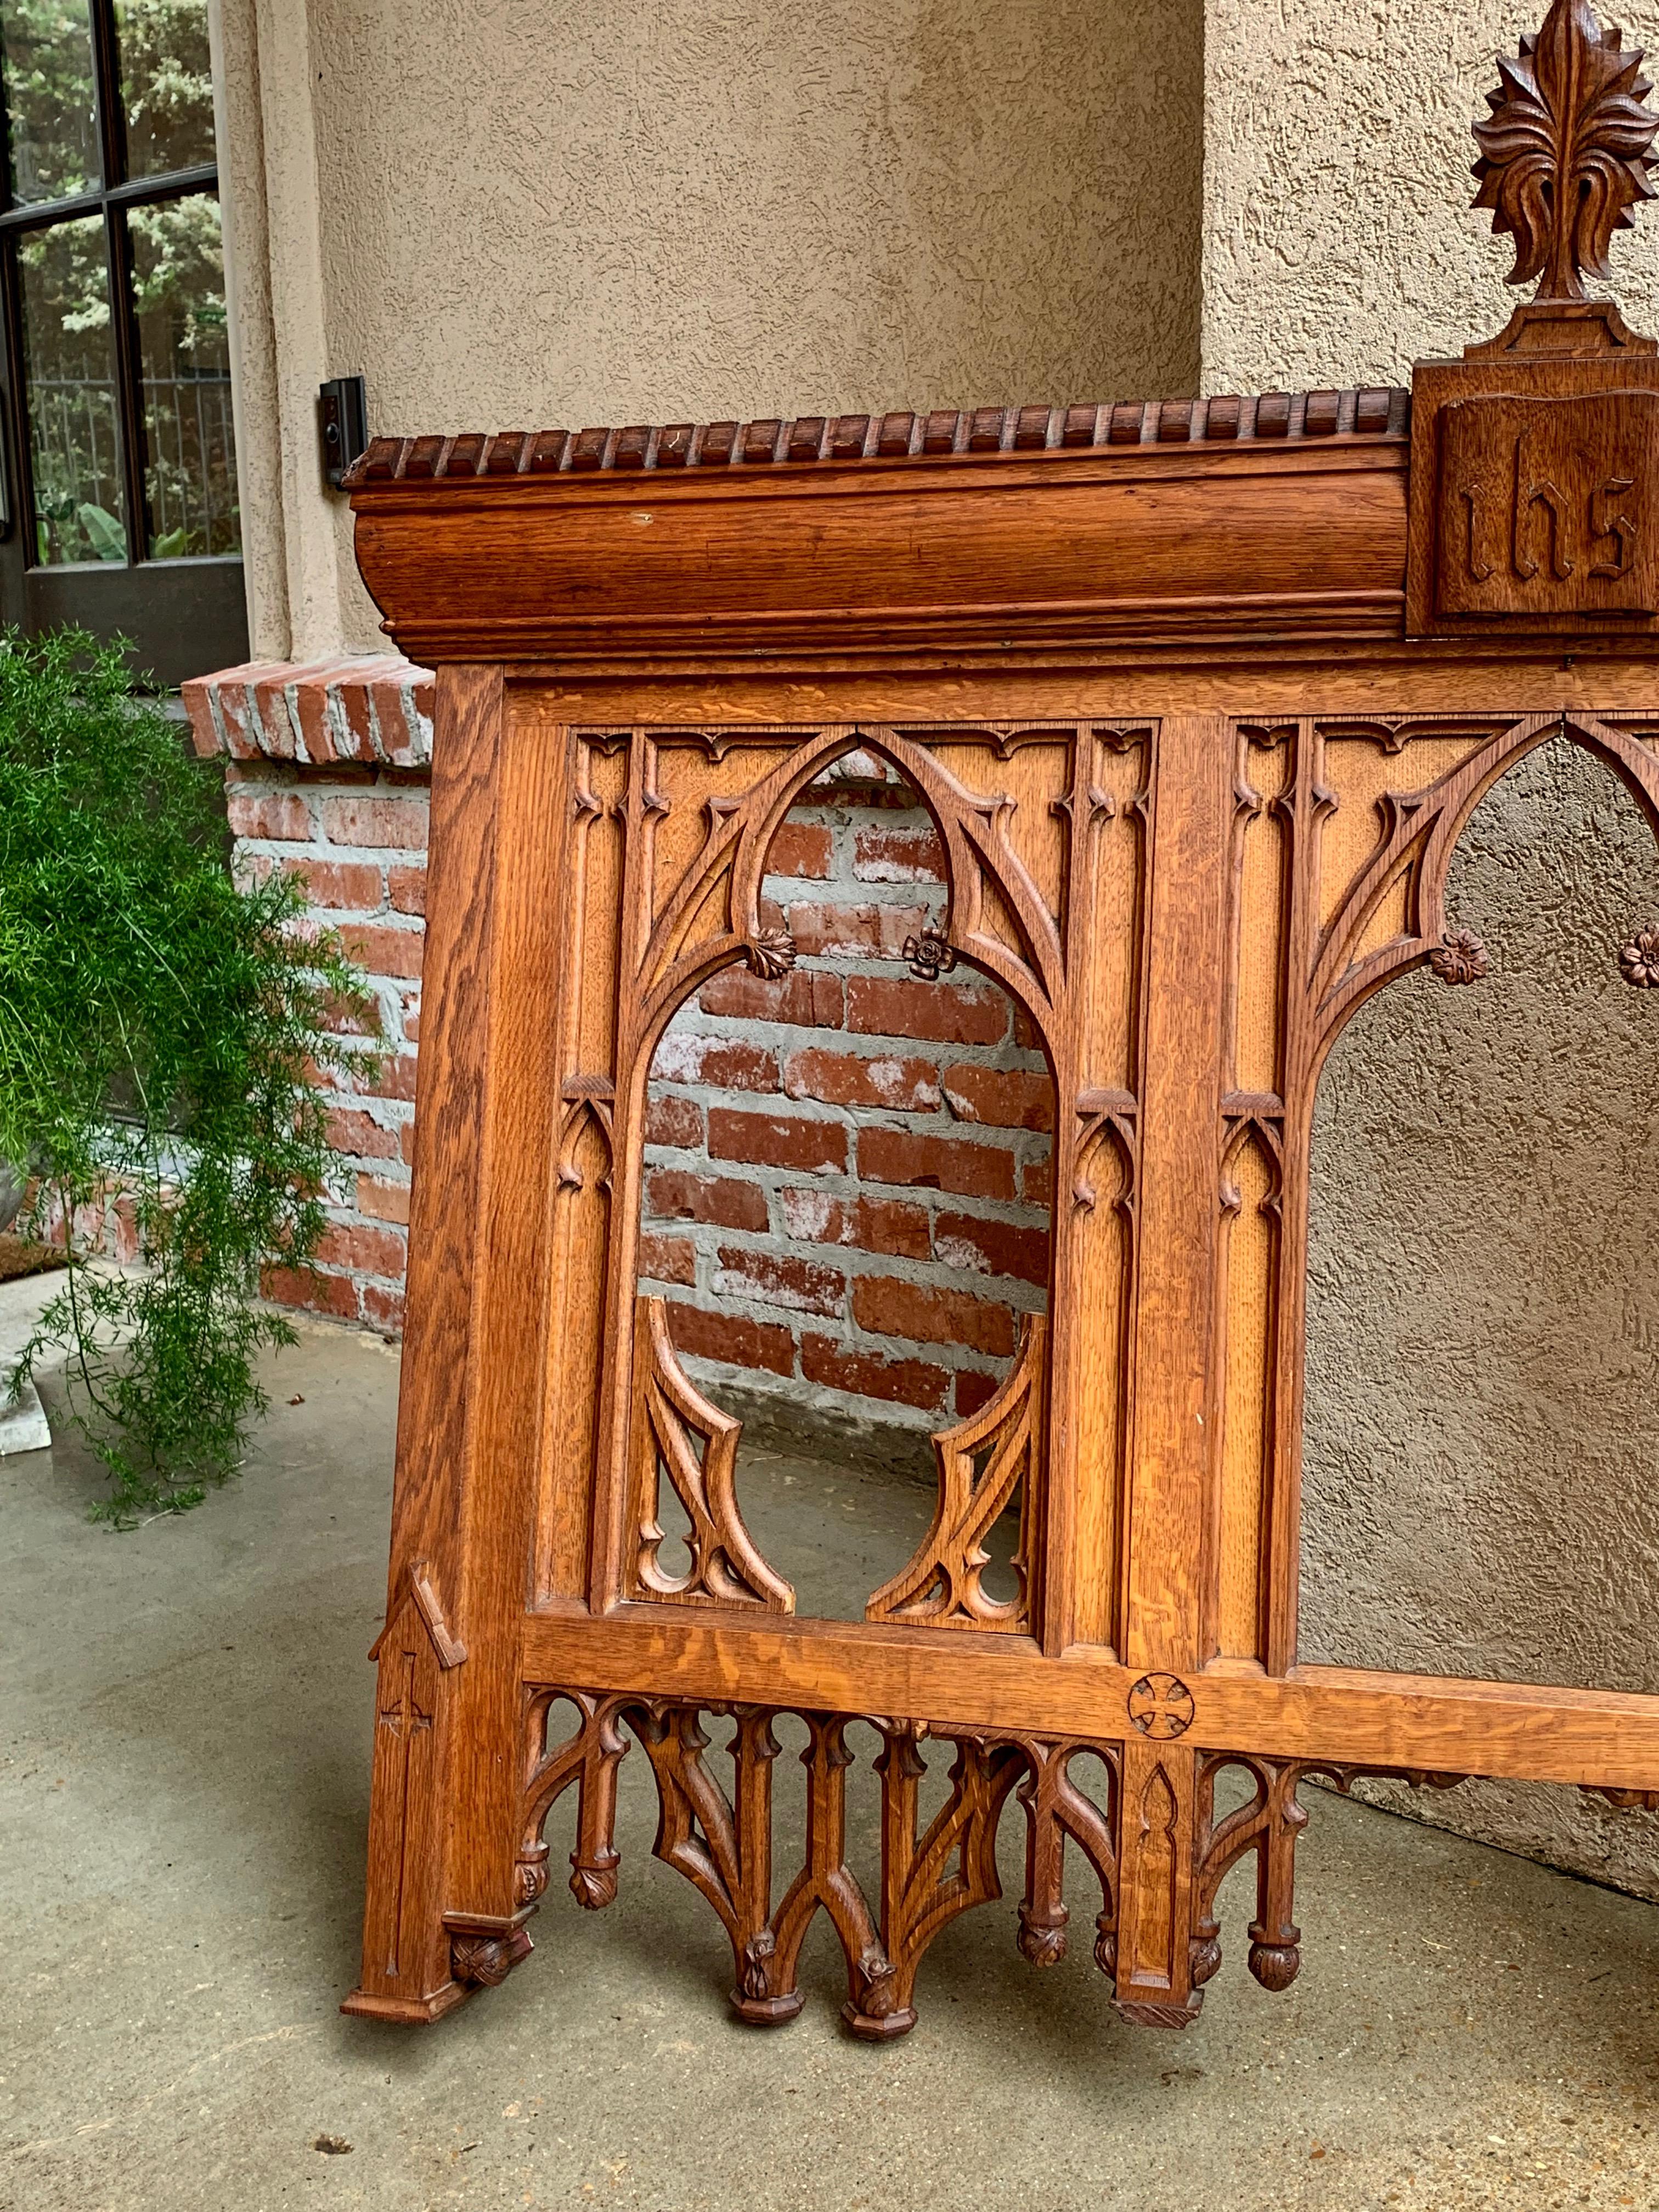 Direct from France, an original French church altar hanging, sourced with all the other interior cabinetry when the church was remodeled~
~Beautiful detailing in the carvings and Gothic tracery~
~(Original altar table that goes below this hanging